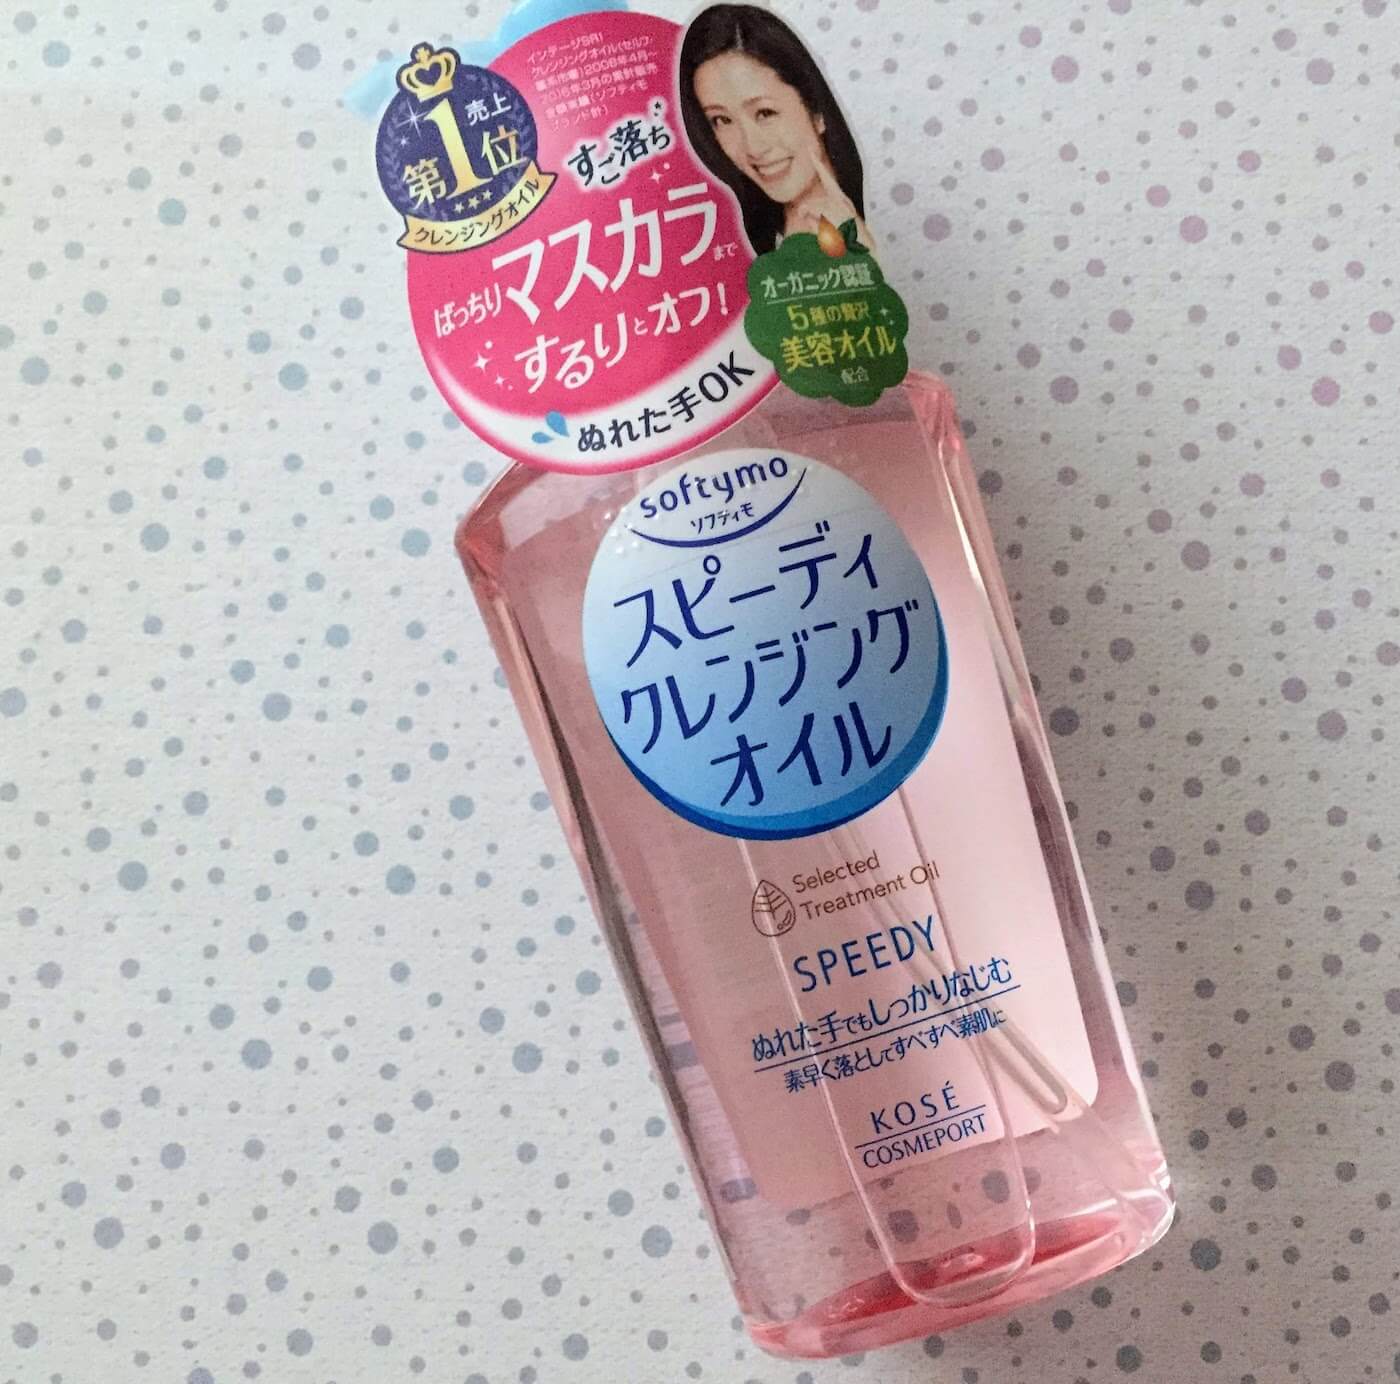 Kose Softymo Speedy Cleansing Oil Review